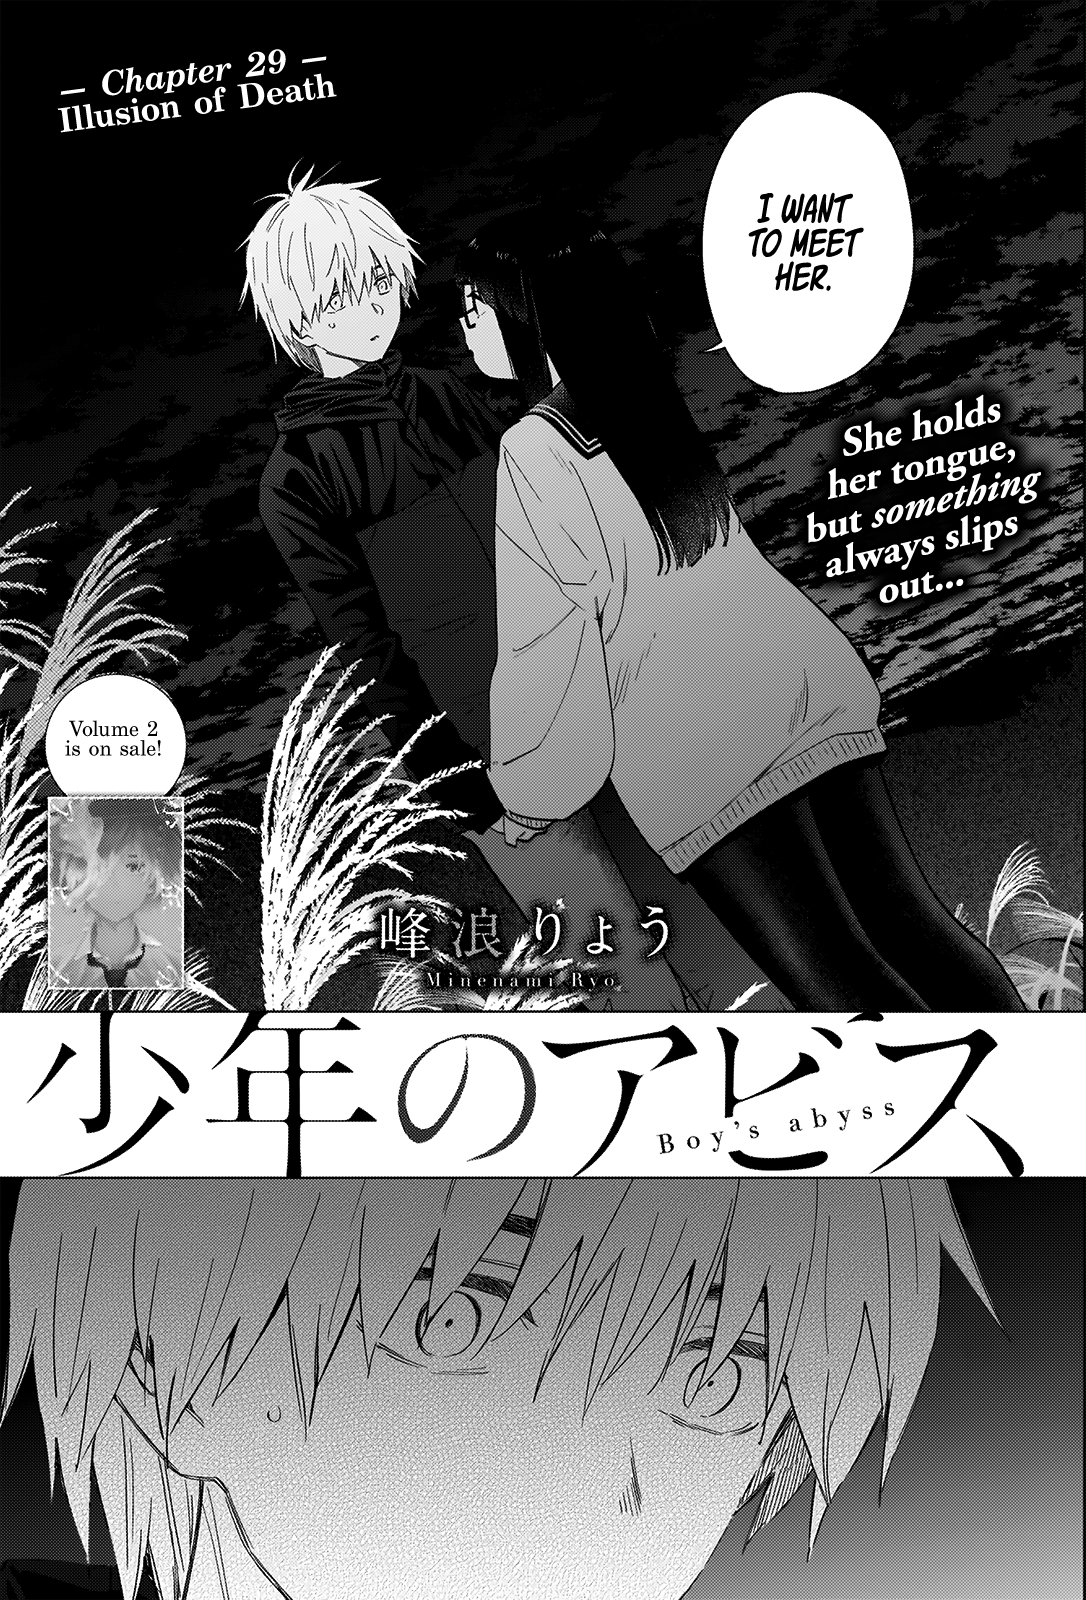 Boy's Abyss - Chapter 29 Page 2